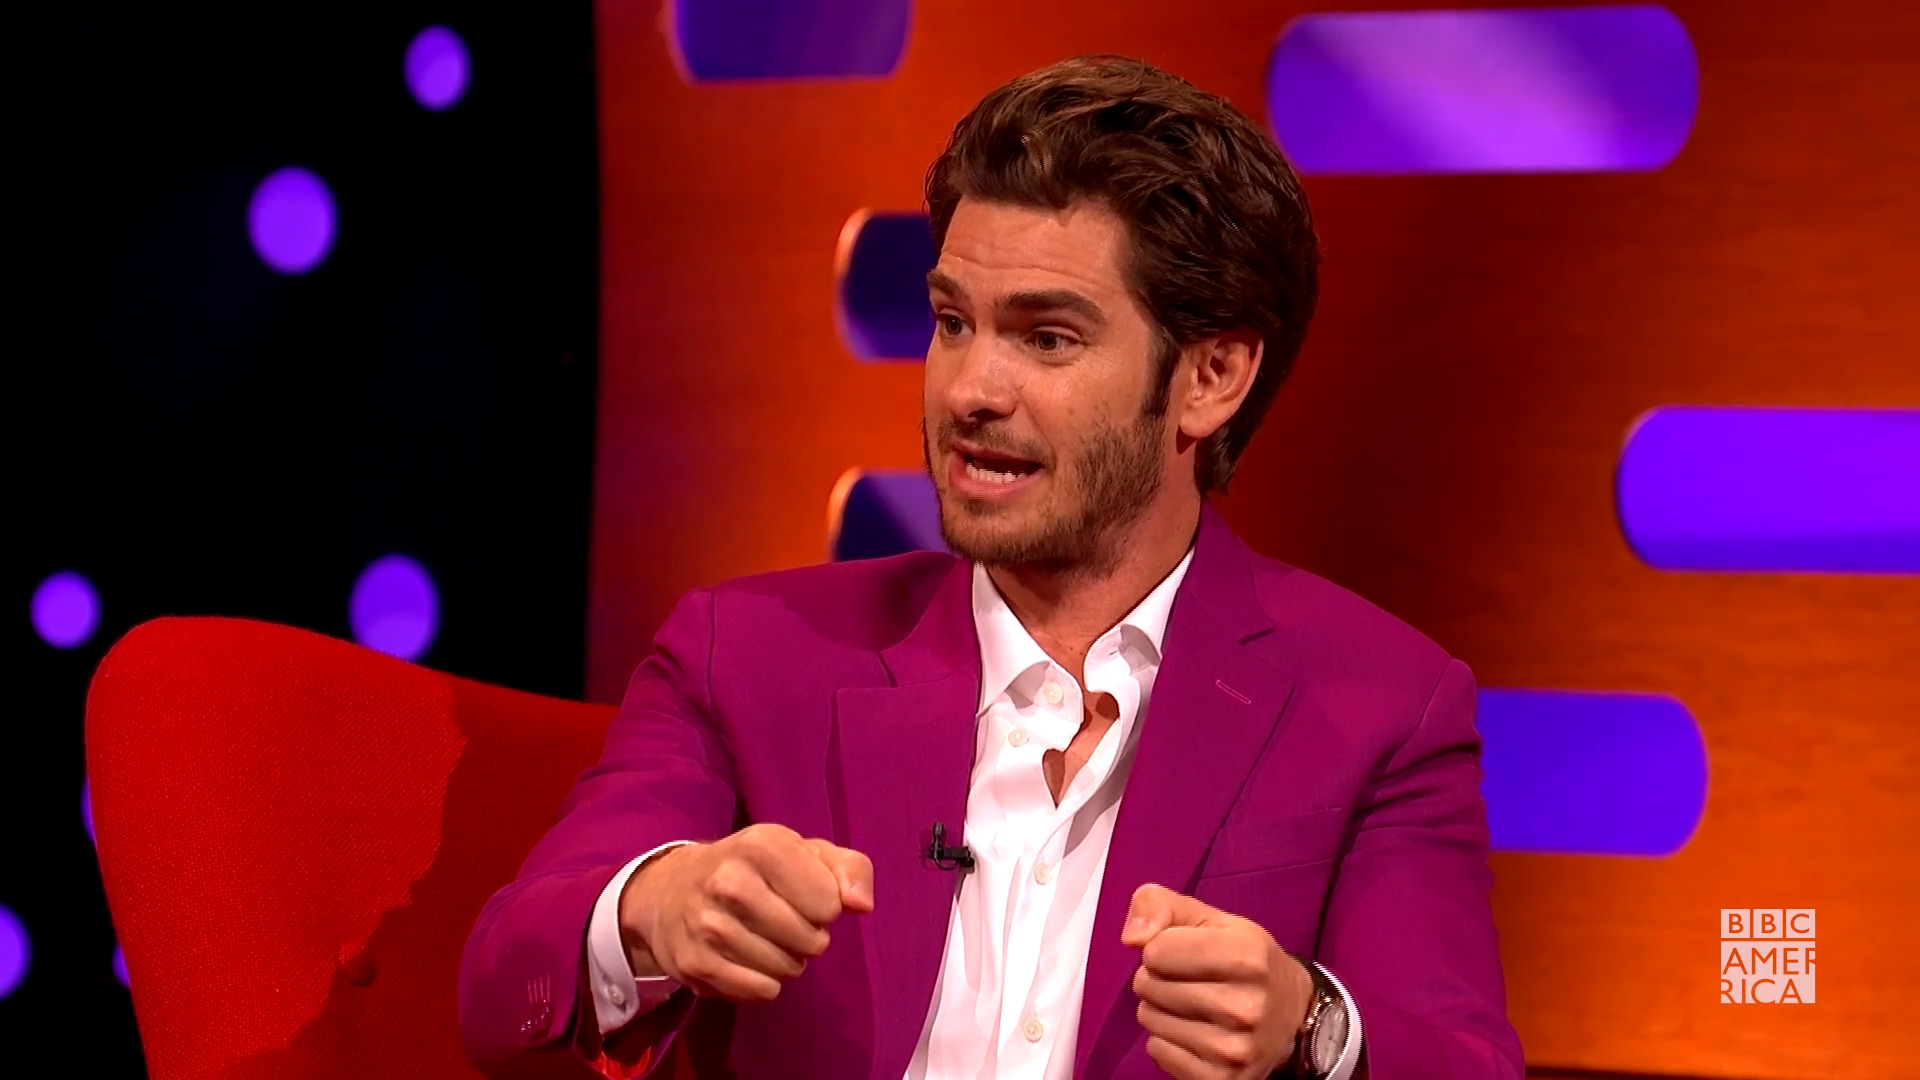 Watch Andrew Garfield Says His Oscar Nomination is Based on a Lie | The Graham Norton Show Video Extras